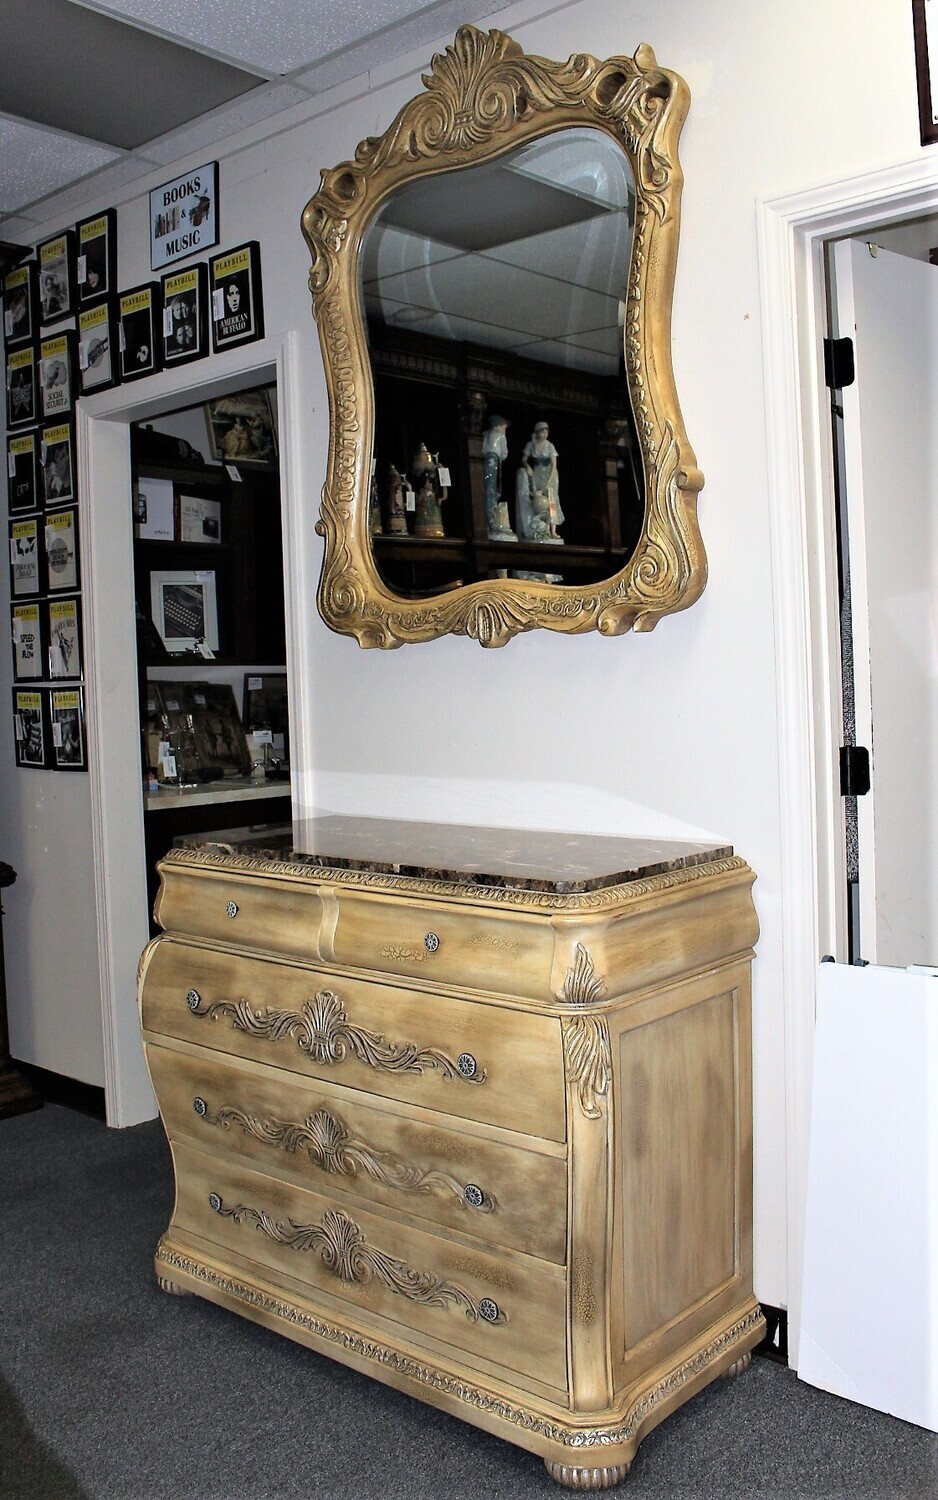 Schnadig Empire Collection Marble Top Dresser and Matching Beveled Mirror